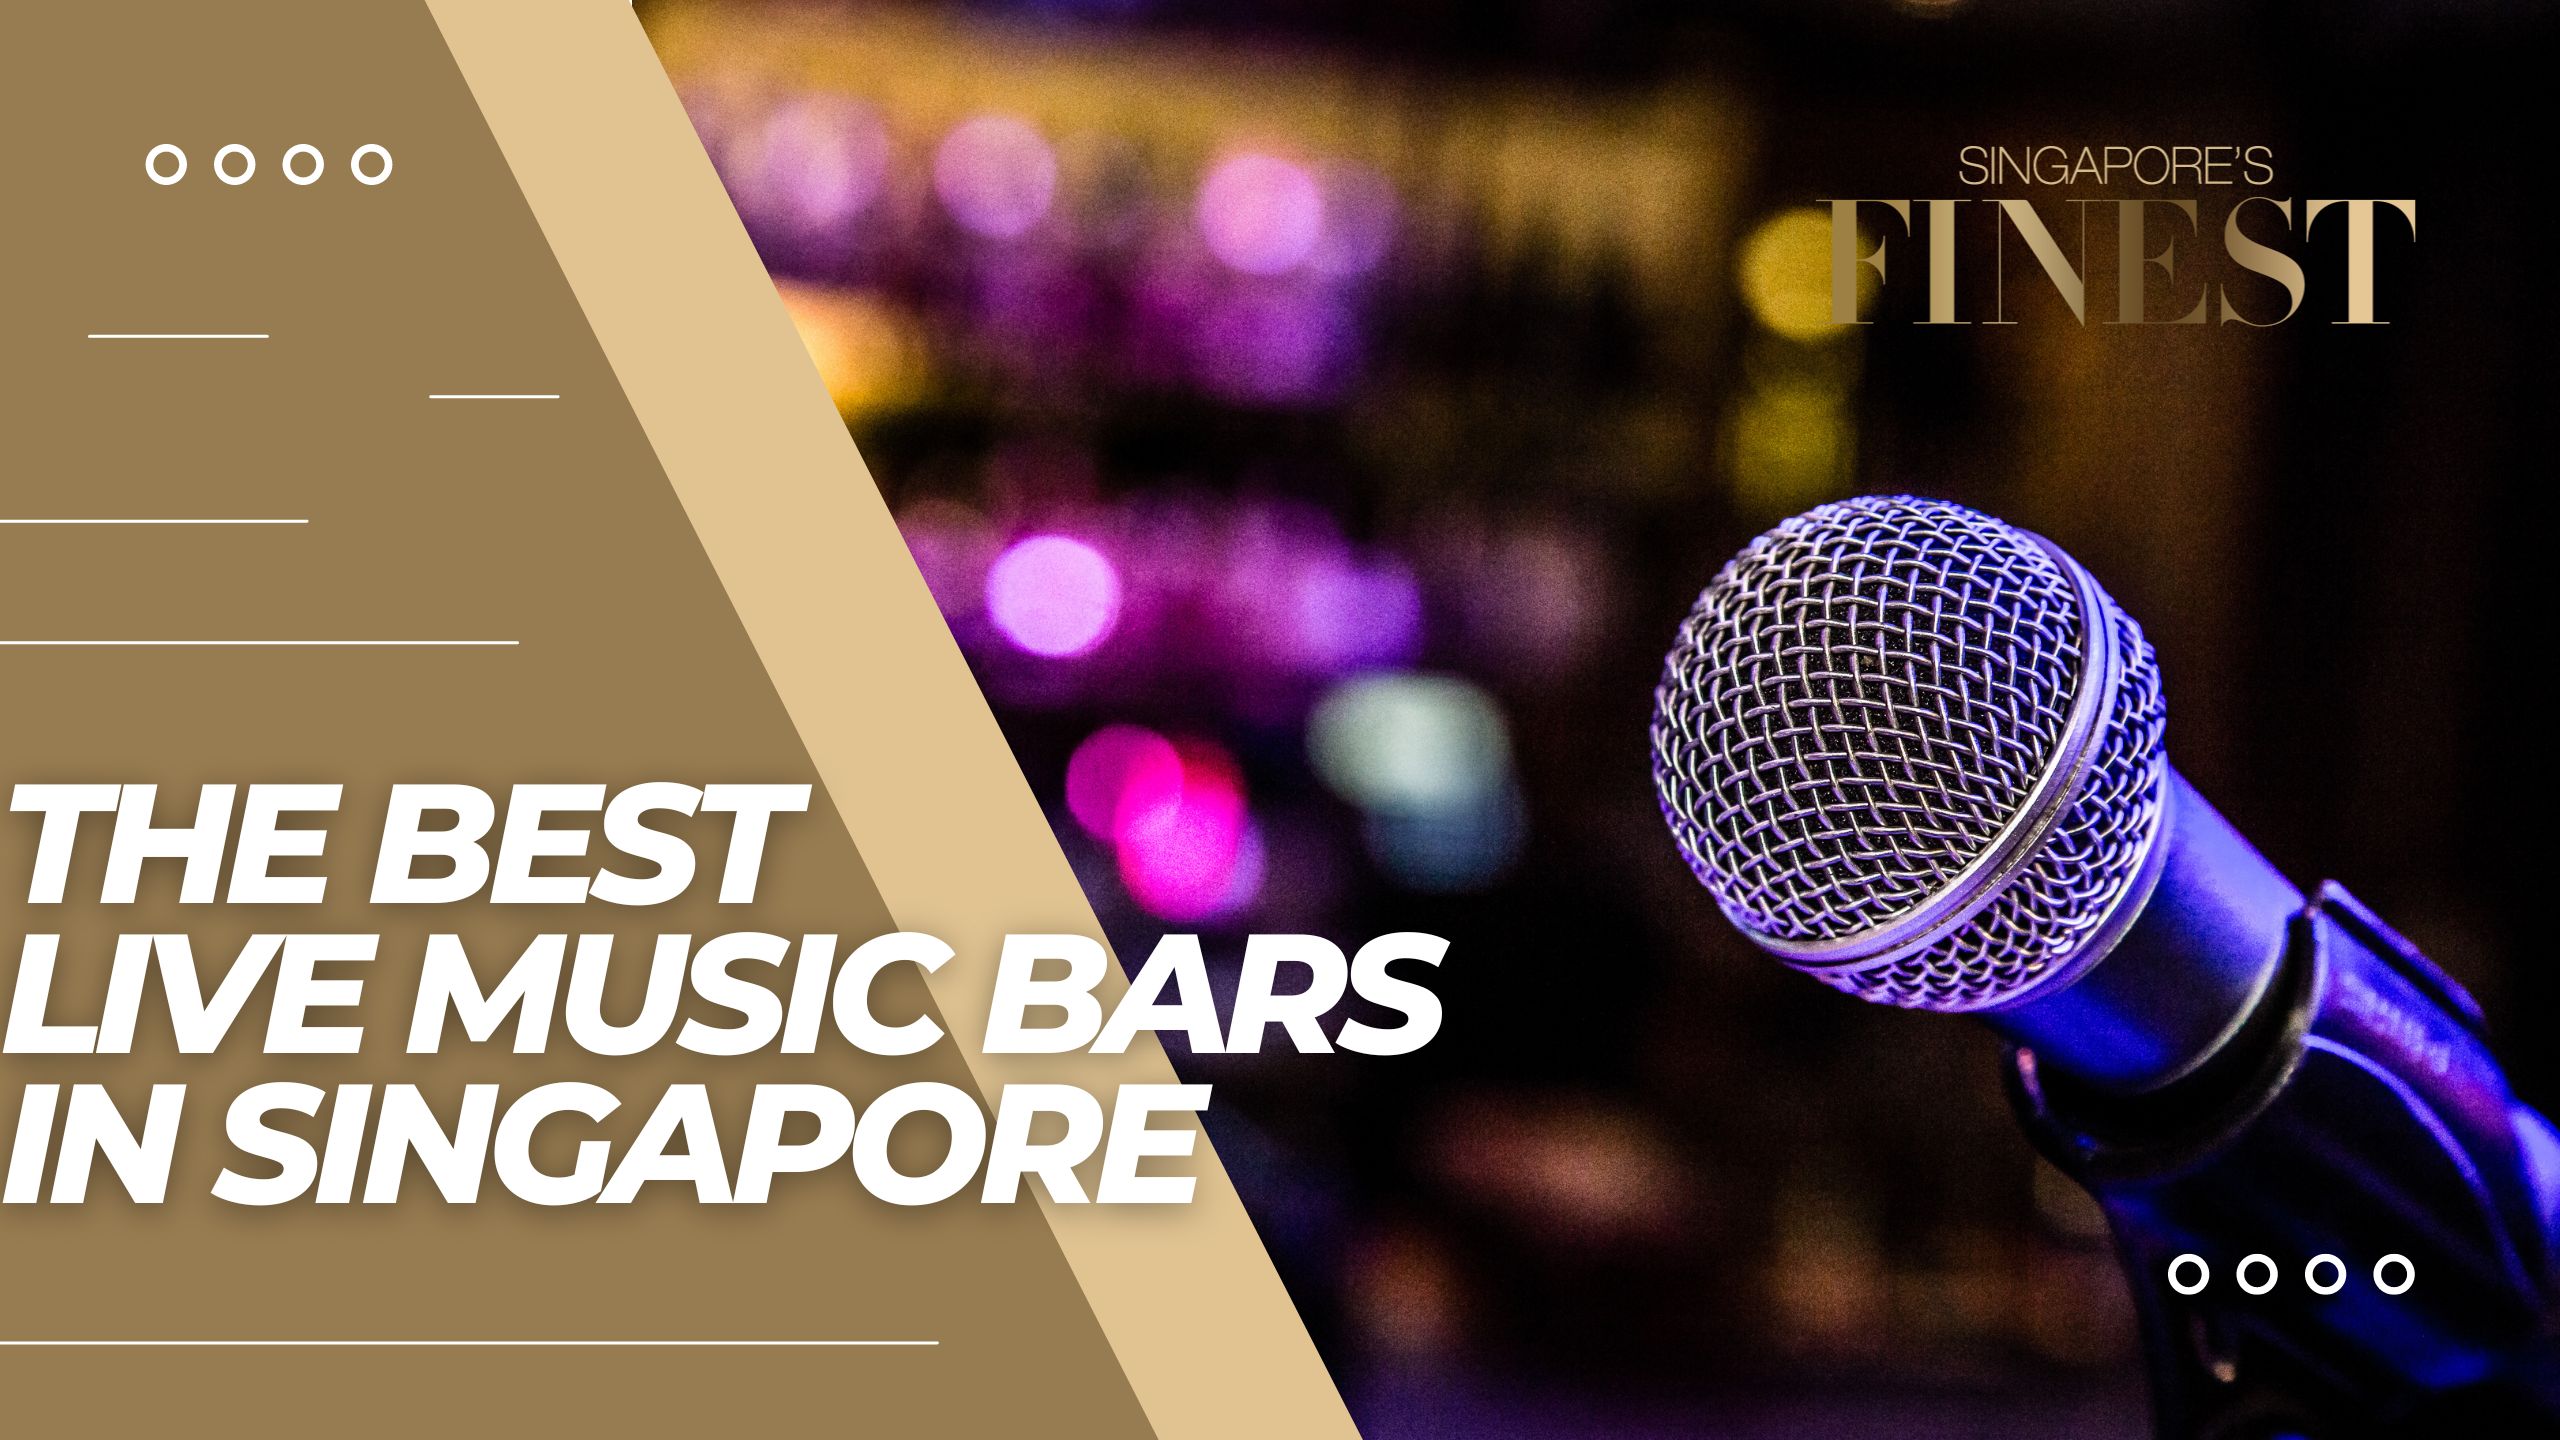 The Finest Live Music Bars in Singapore